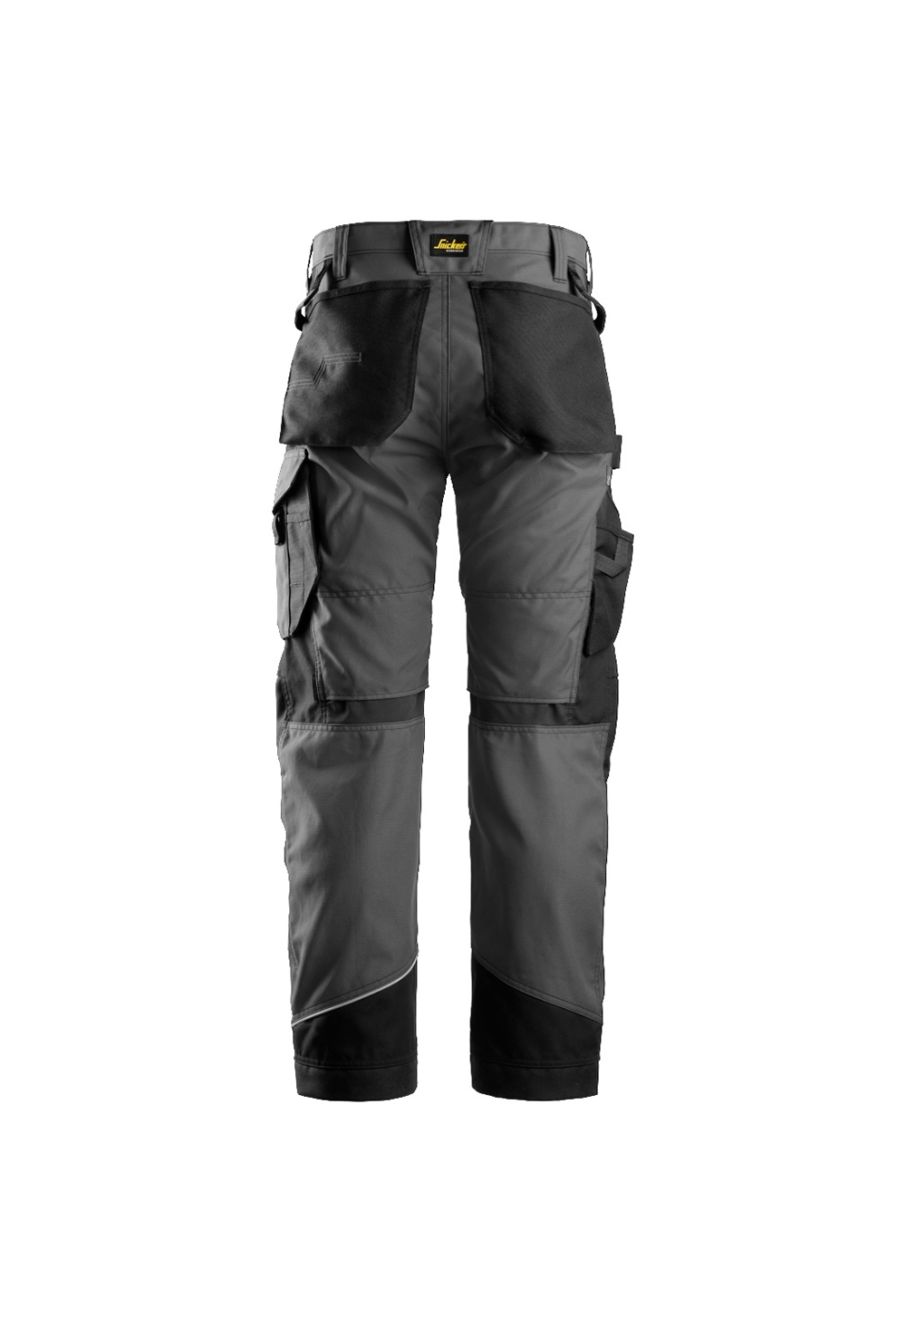 Snickers Ruff Work Trousers – Griffiths Hire Shops Ltd